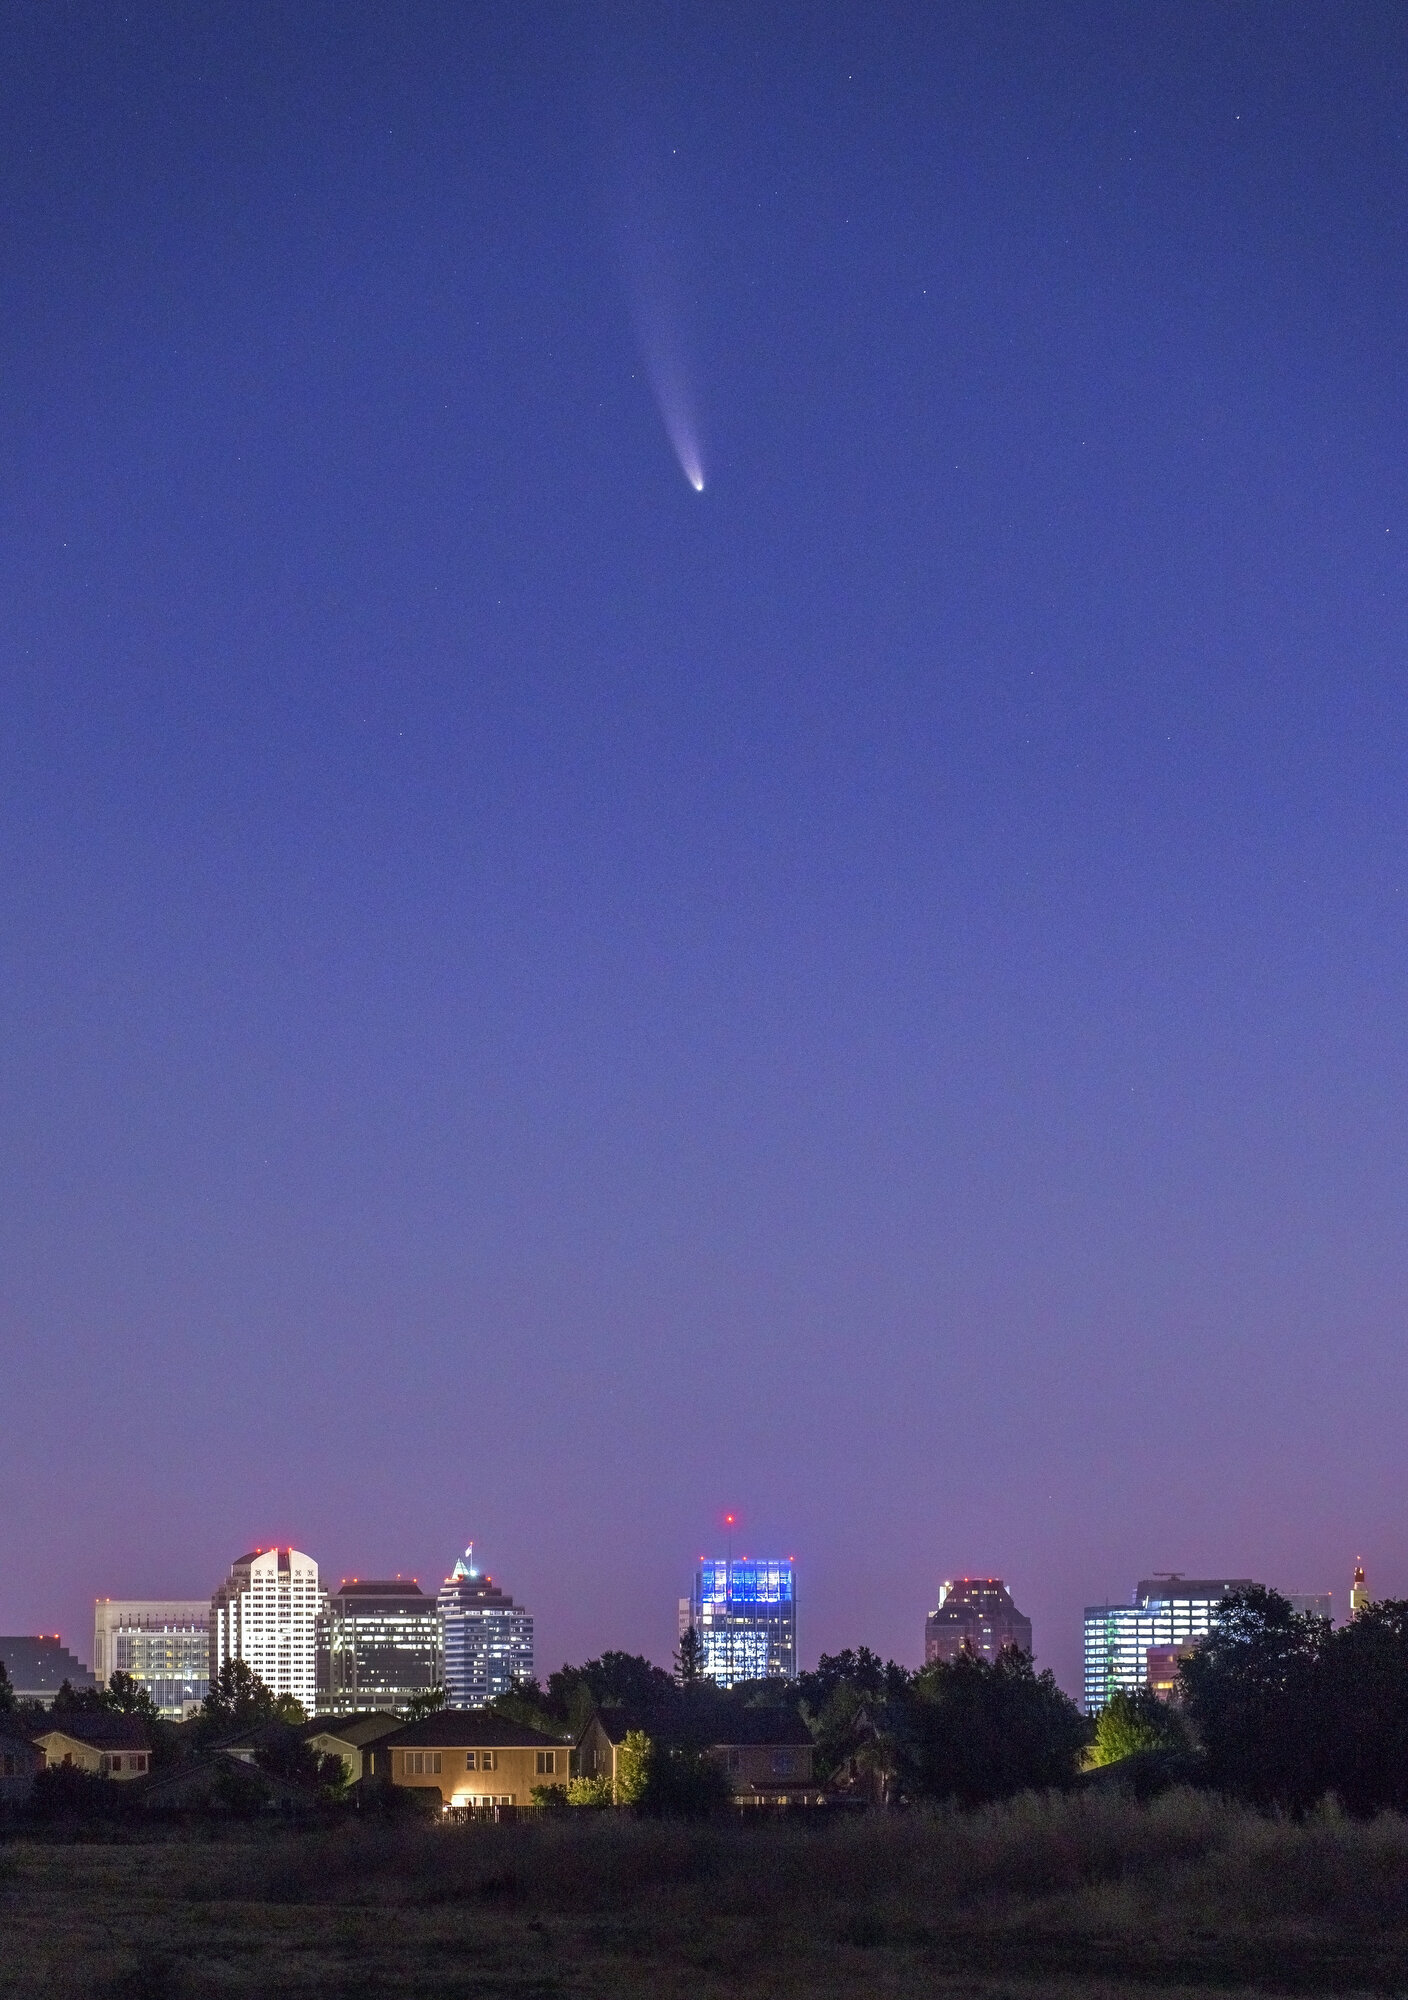  Seen from West Sacramento, comet C/2020 F3, commonly referred to as comet 'Neowise'  is visible in the northeast sky over the skyline of Sacramento, Calif.  Sunday, Jul. 12, 2020. 